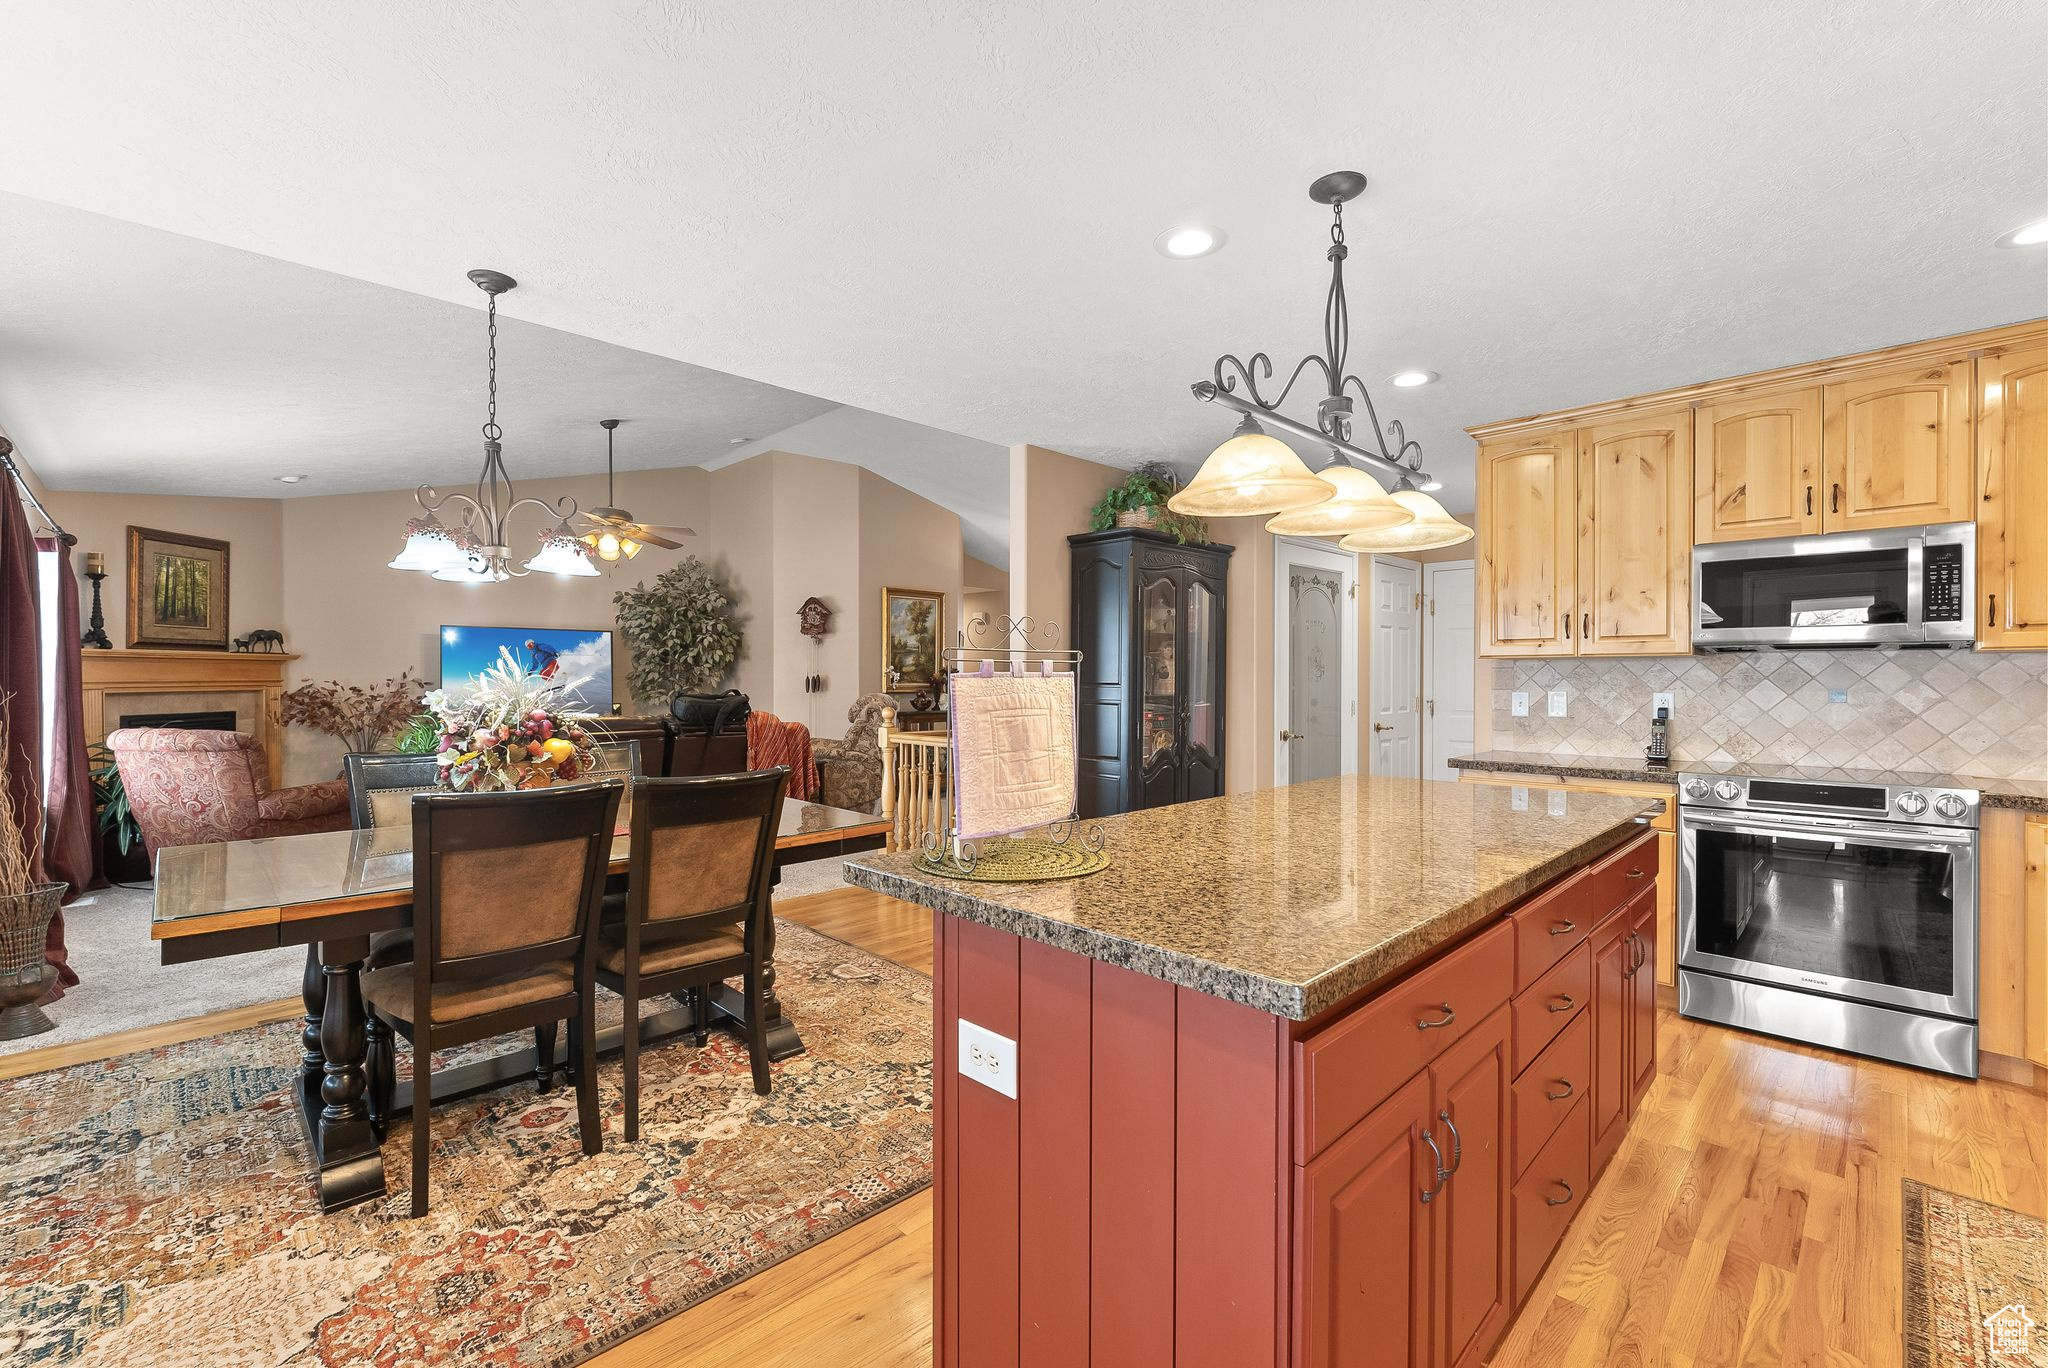 Kitchen with a notable chandelier, appliances with stainless steel finishes, light hardwood / wood-style floors, a kitchen island, and pendant lighting